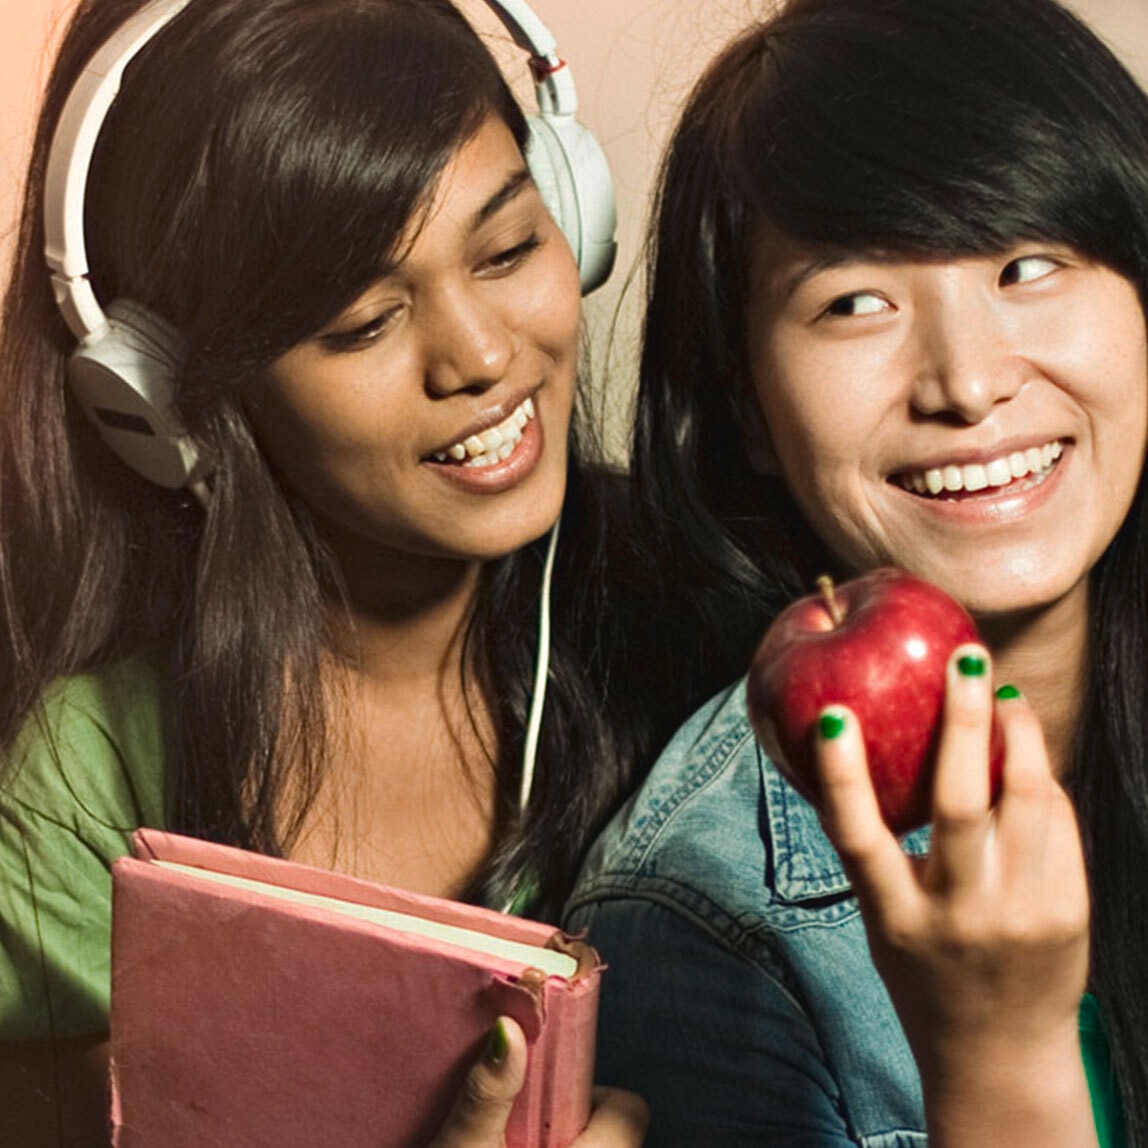 Two women with thick black hair. One is holding a red apple, the other is wearing large headphones and looking over the first's shoulder.